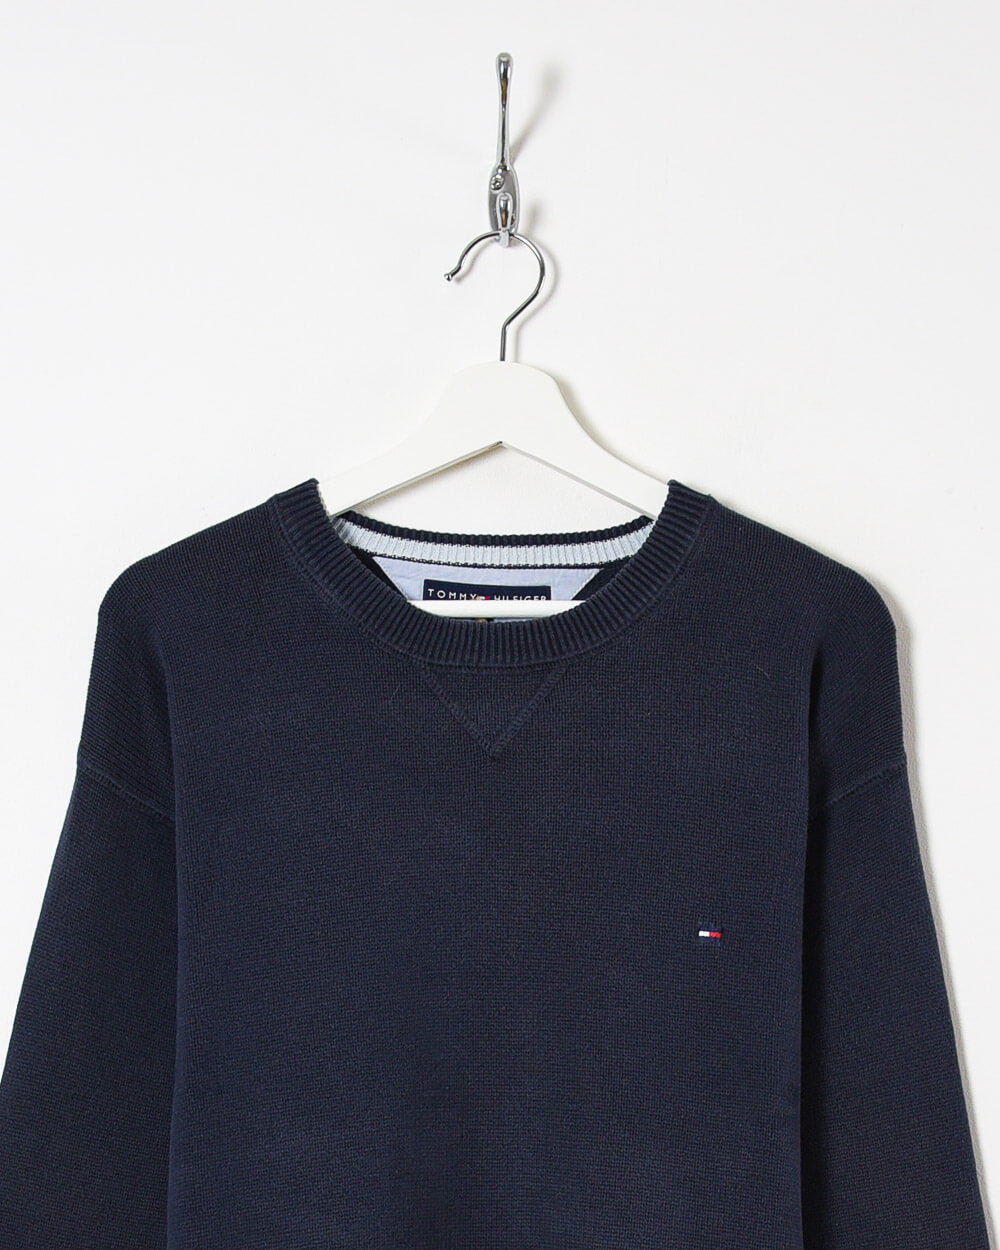 Tommy Hilfiger Knitted Sweatshirt - Large - Domno Vintage 90s, 80s, 00s Retro and Vintage Clothing 